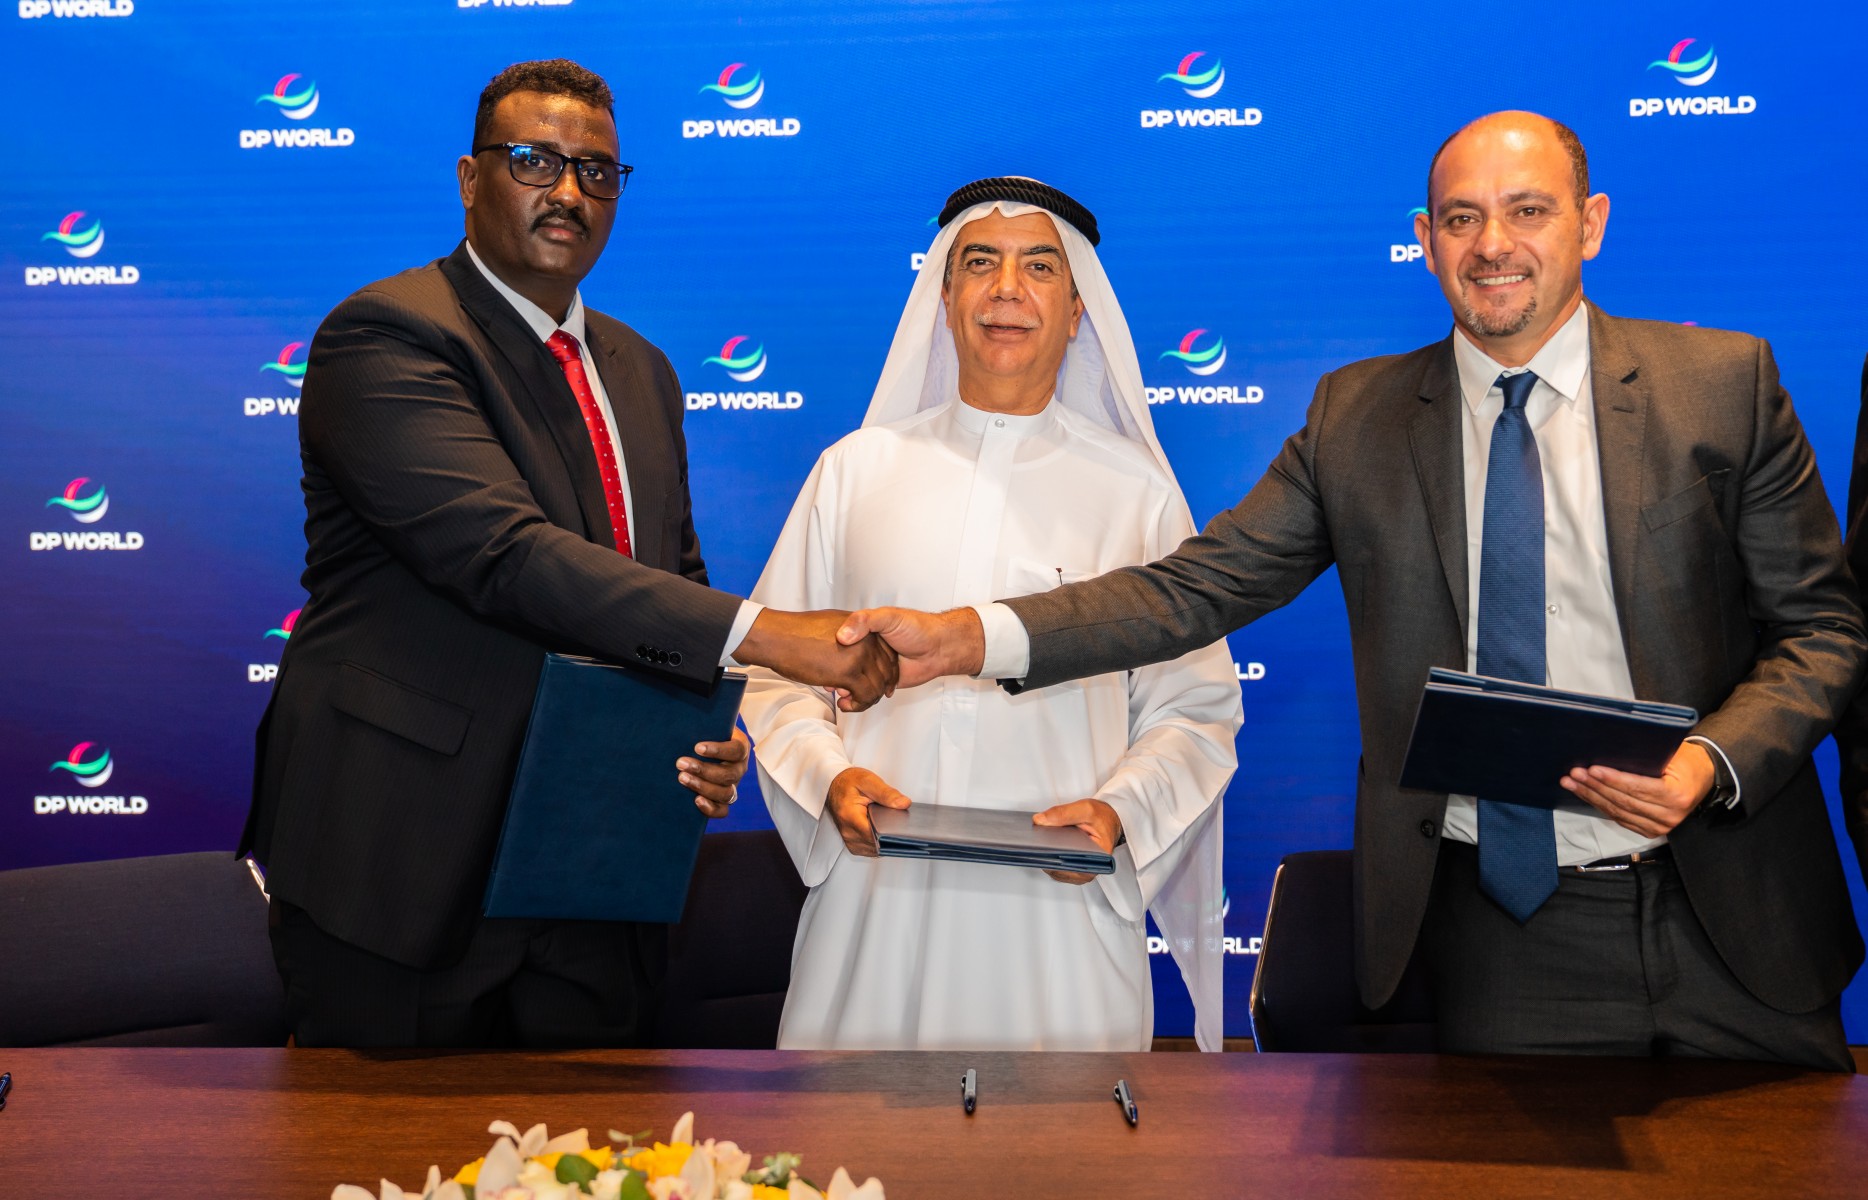 DP World and Puntland Government sign construction agreement to upgrade Port of Bosaso